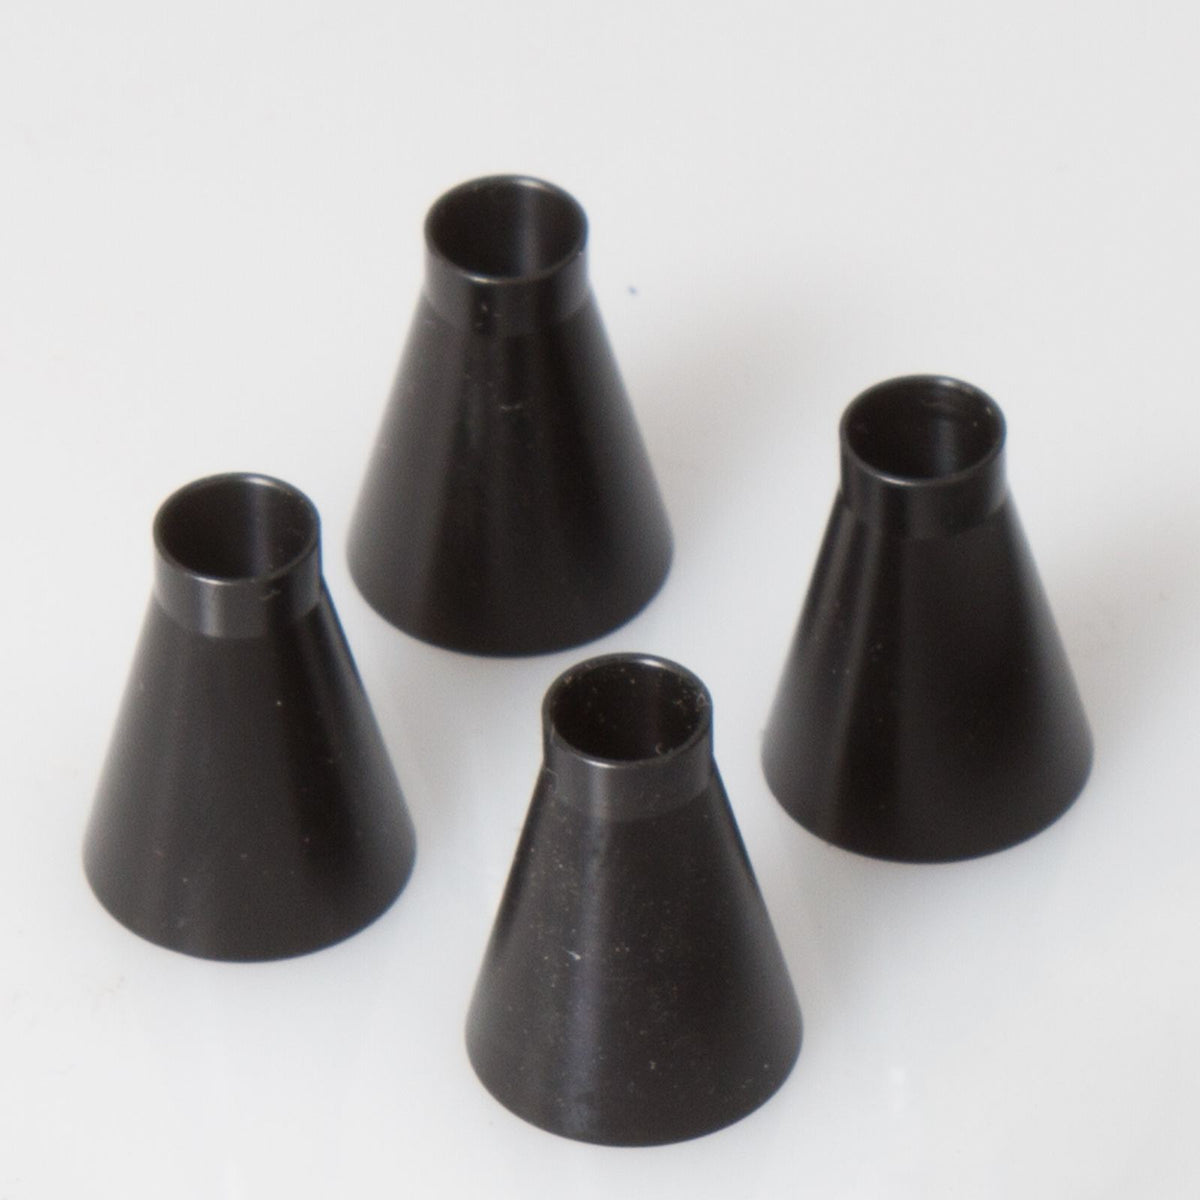 Non-Stick Plastic Bushings for CA Finishing or Slow Speed Blank Drying System